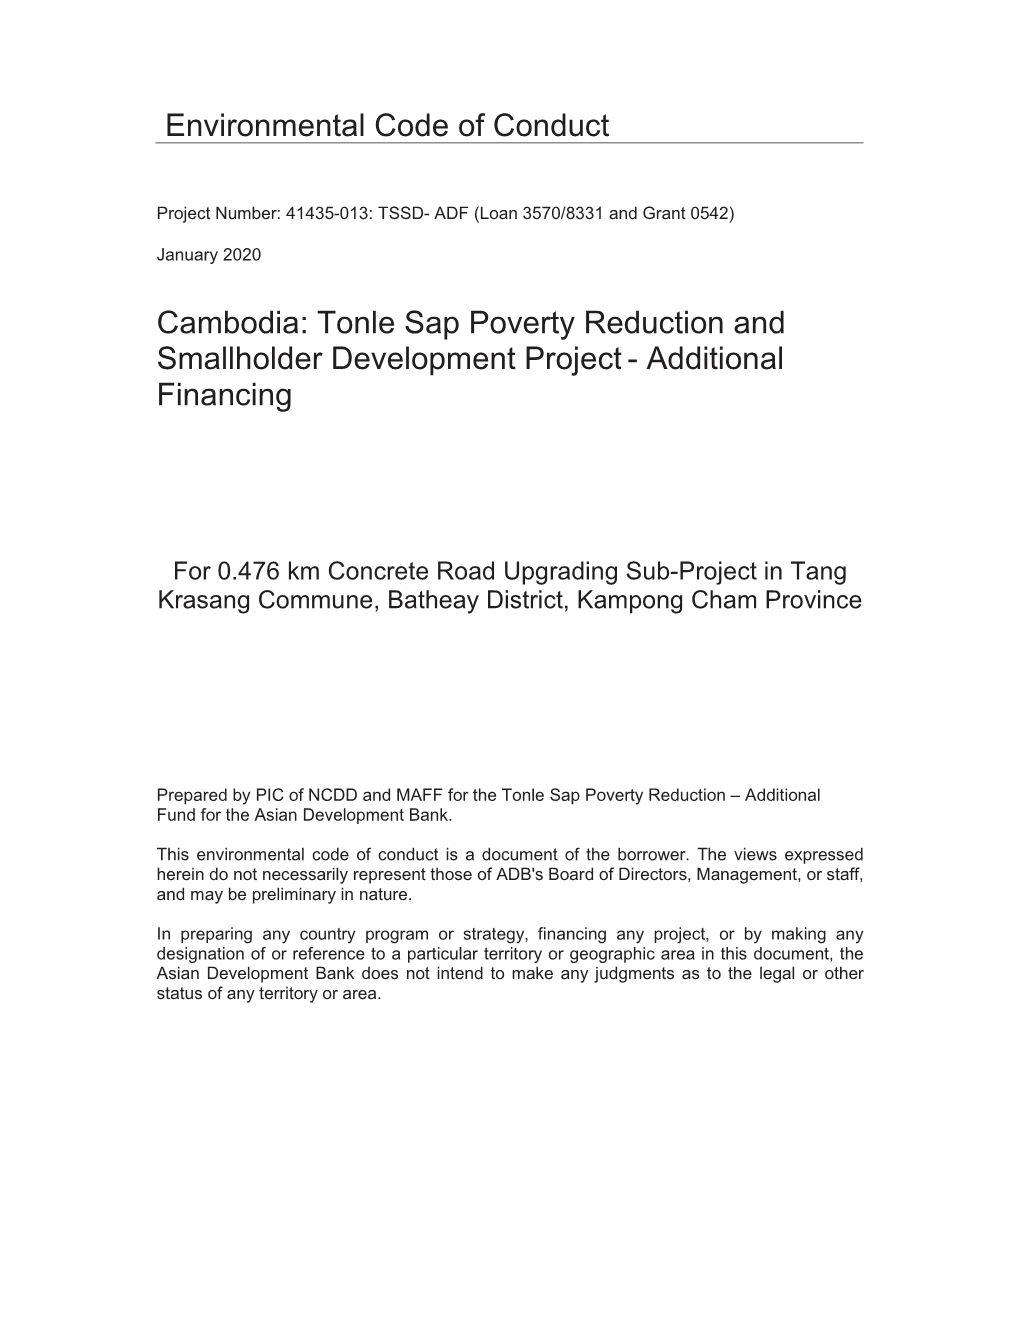 Tonle Sap Poverty Reduction and Smallholder Development Project - Additional Financing